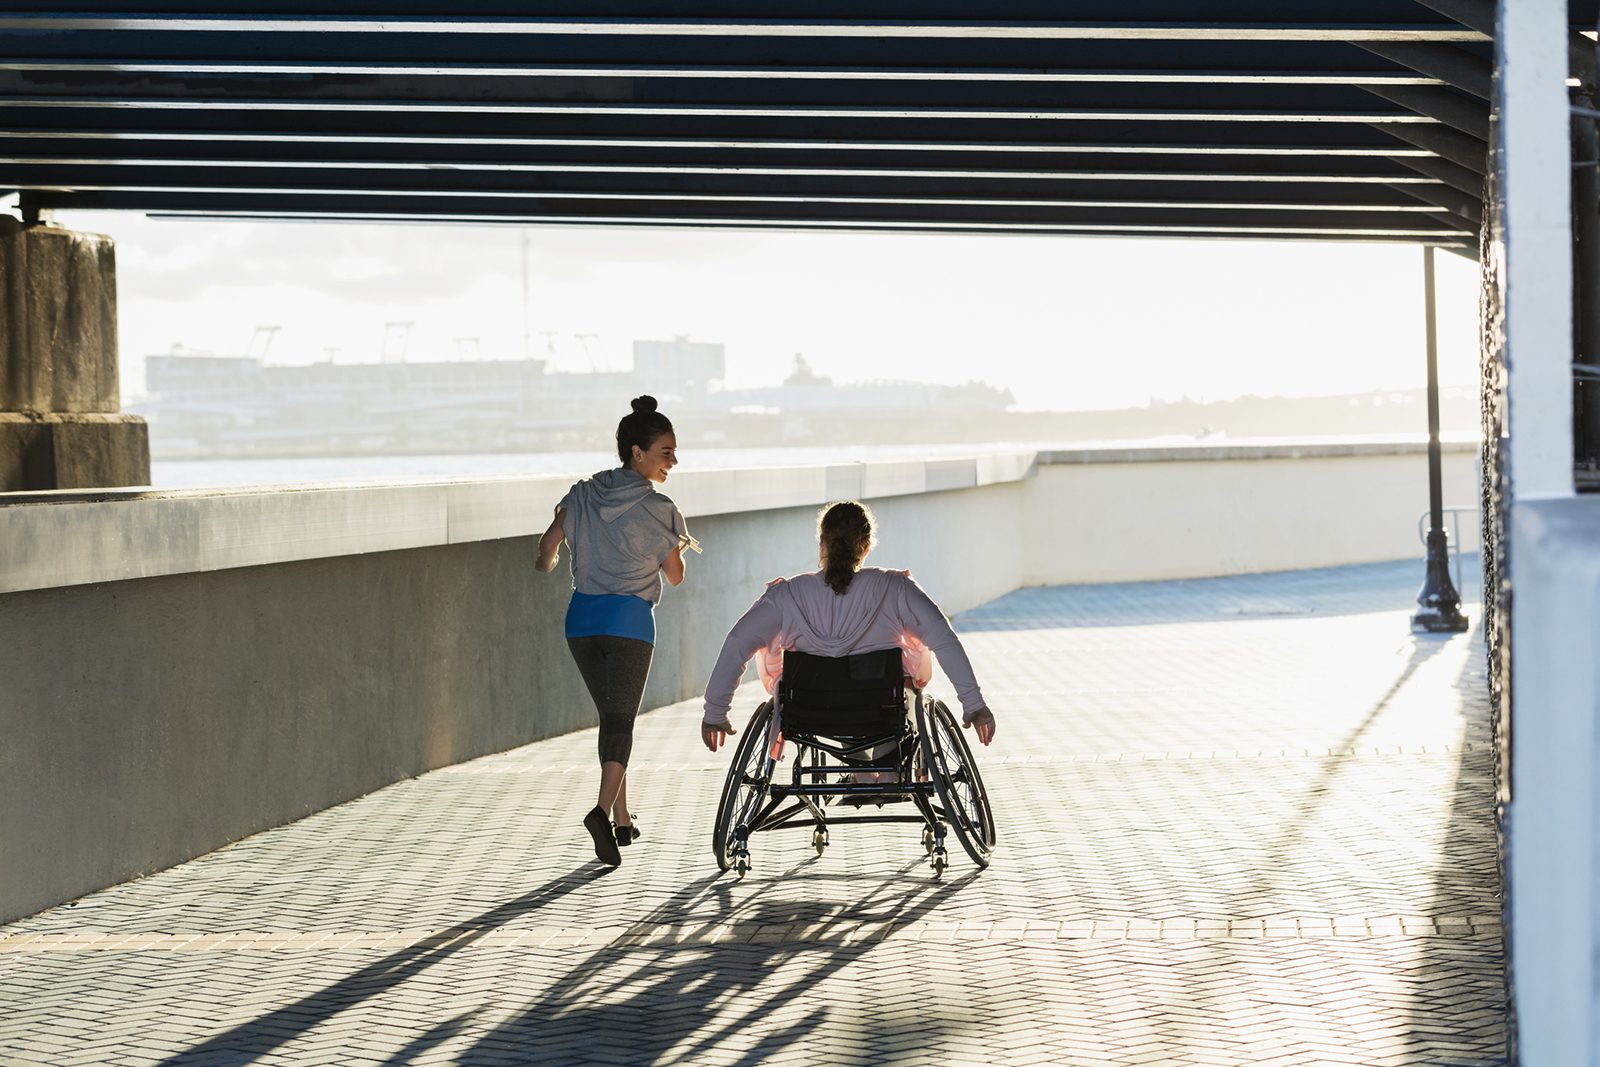 A rear view of two people exercising along a city waterfront. One person is jogging and speaking to her friend, who is rolling beside her in a wheelchair